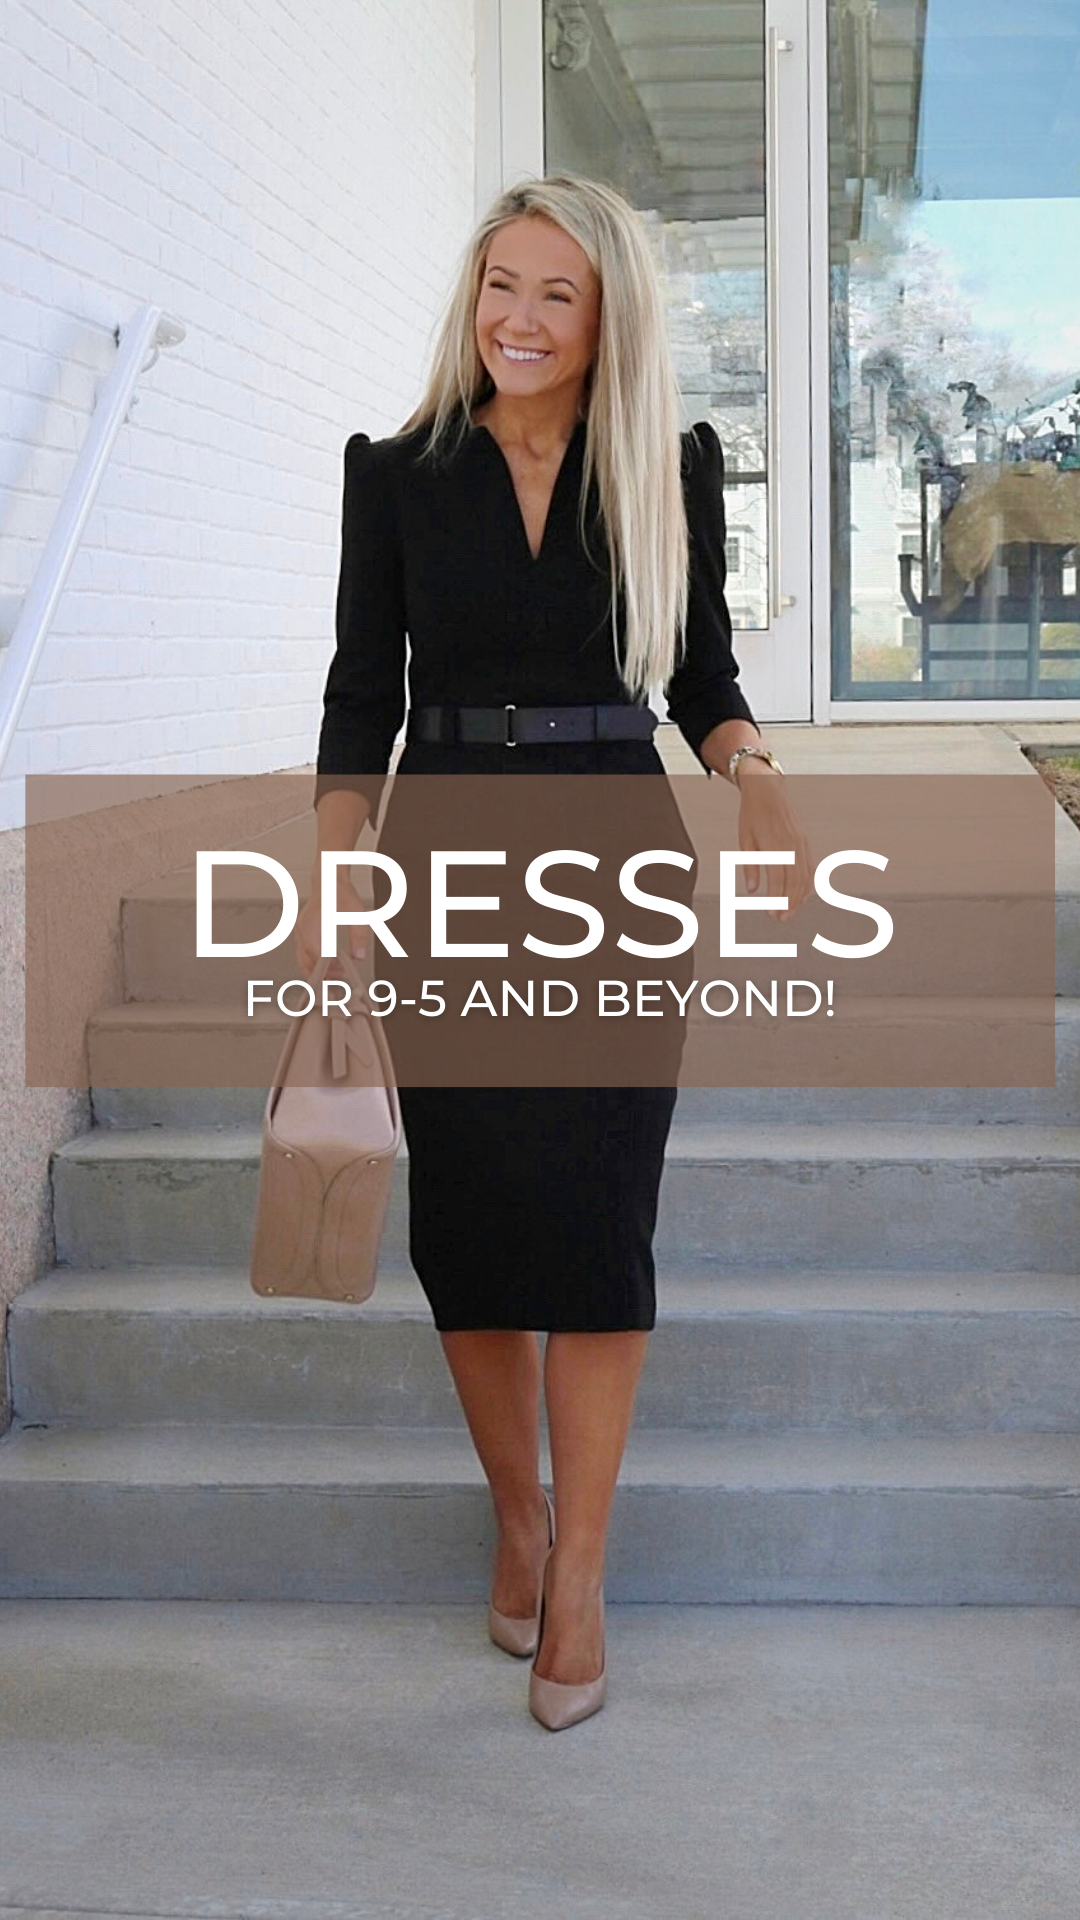 Dresses For 9-5 and Beyond!